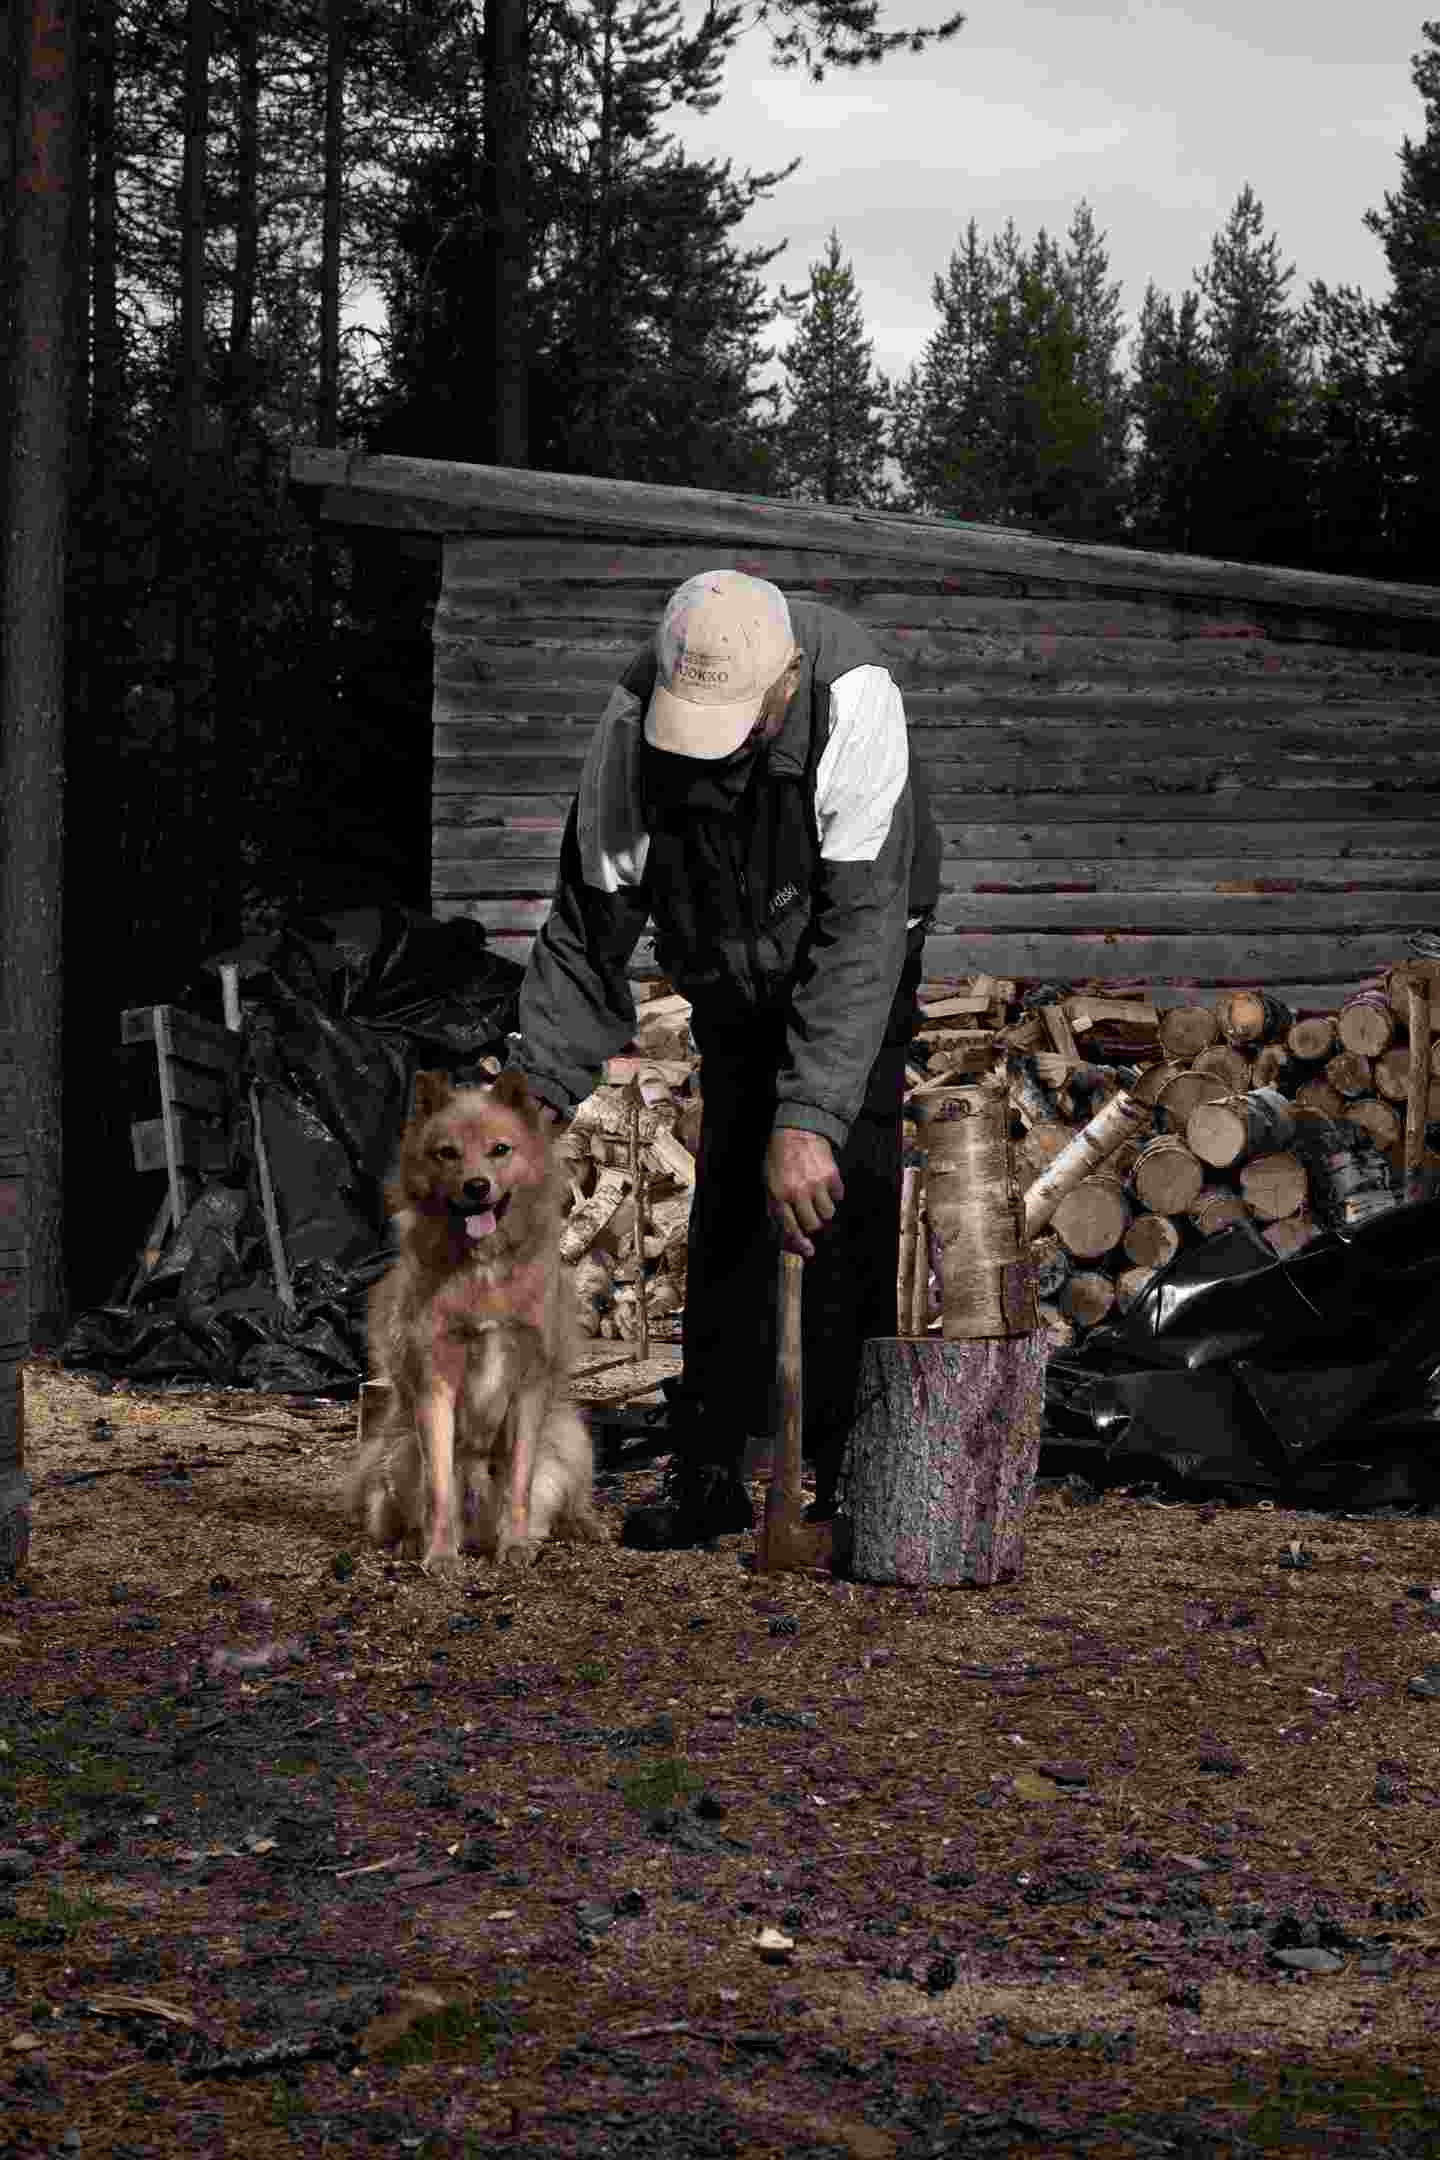 A person strokes a dog in front of a wooden shed.